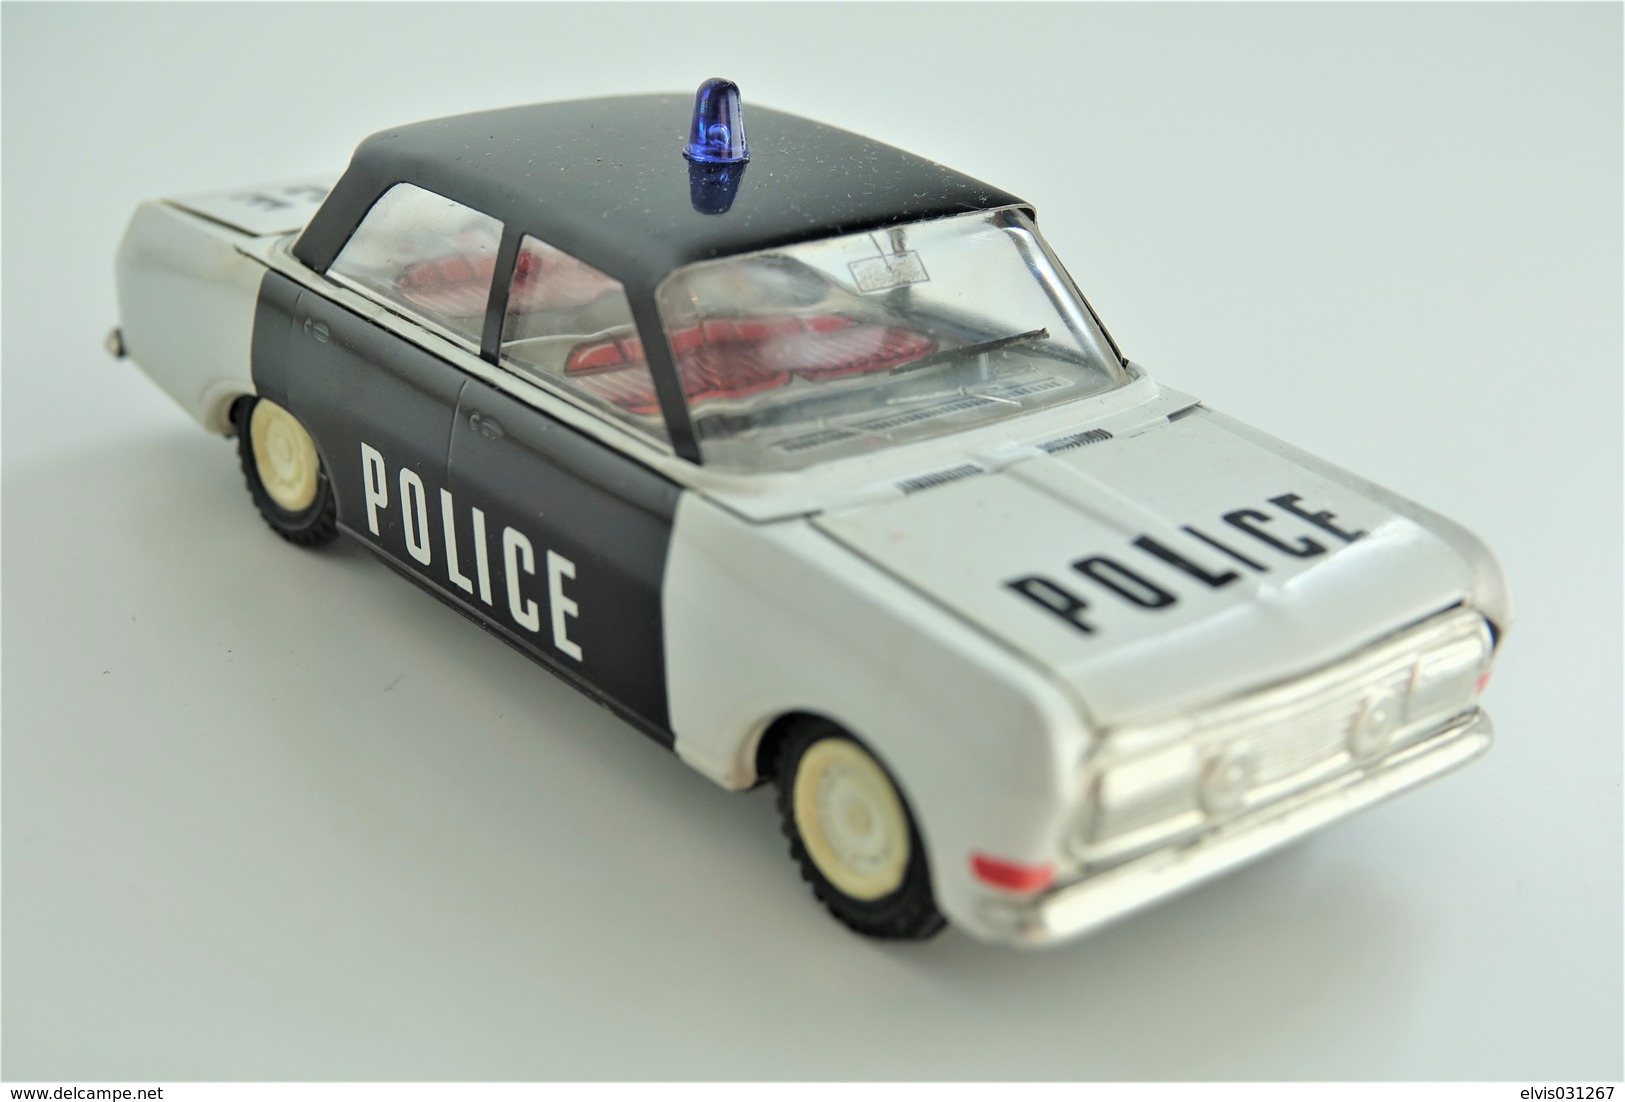 Vintage TIN TOY CAR : Mark PLASTICART With BOX - Police Car - 15cm - DDR GDR GERMANY- 1960's - Friction Powered - Collectors Et Insolites - Toutes Marques